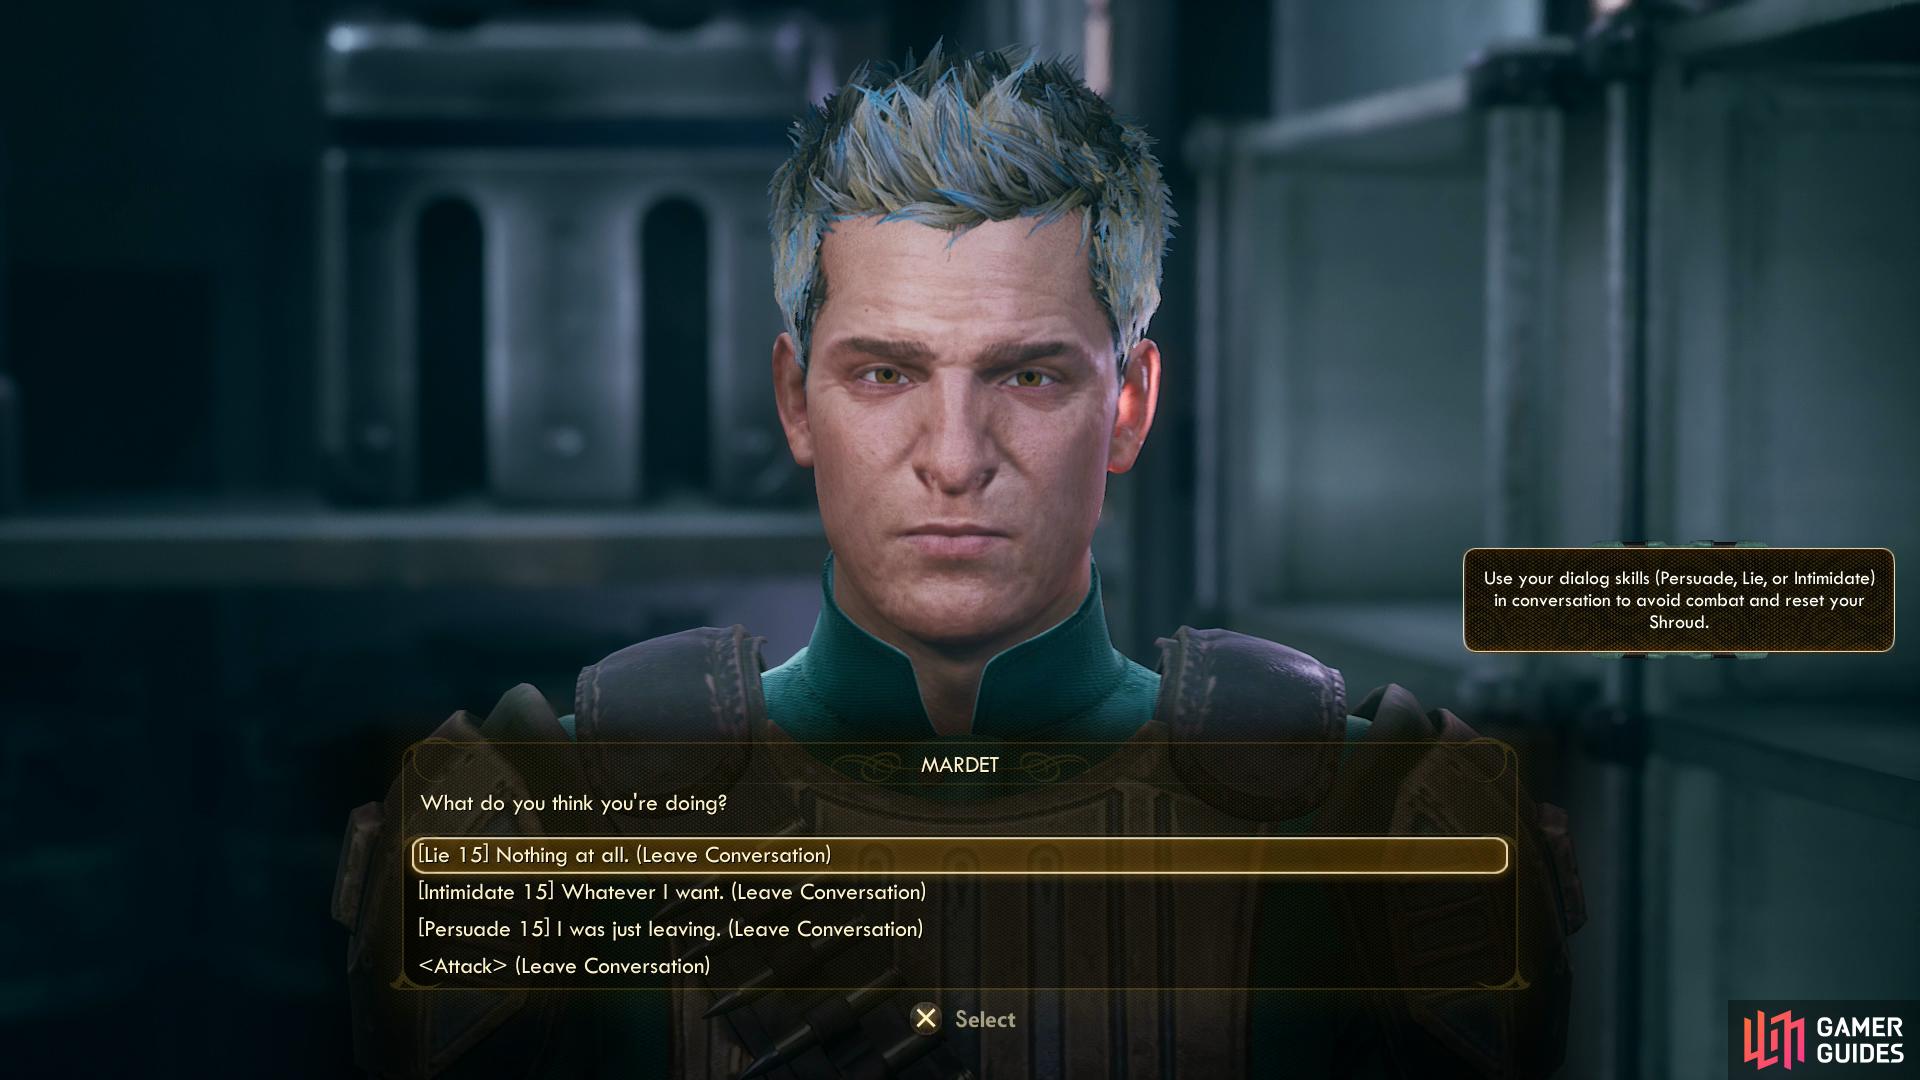 The Outer Worlds review: Your story to tell